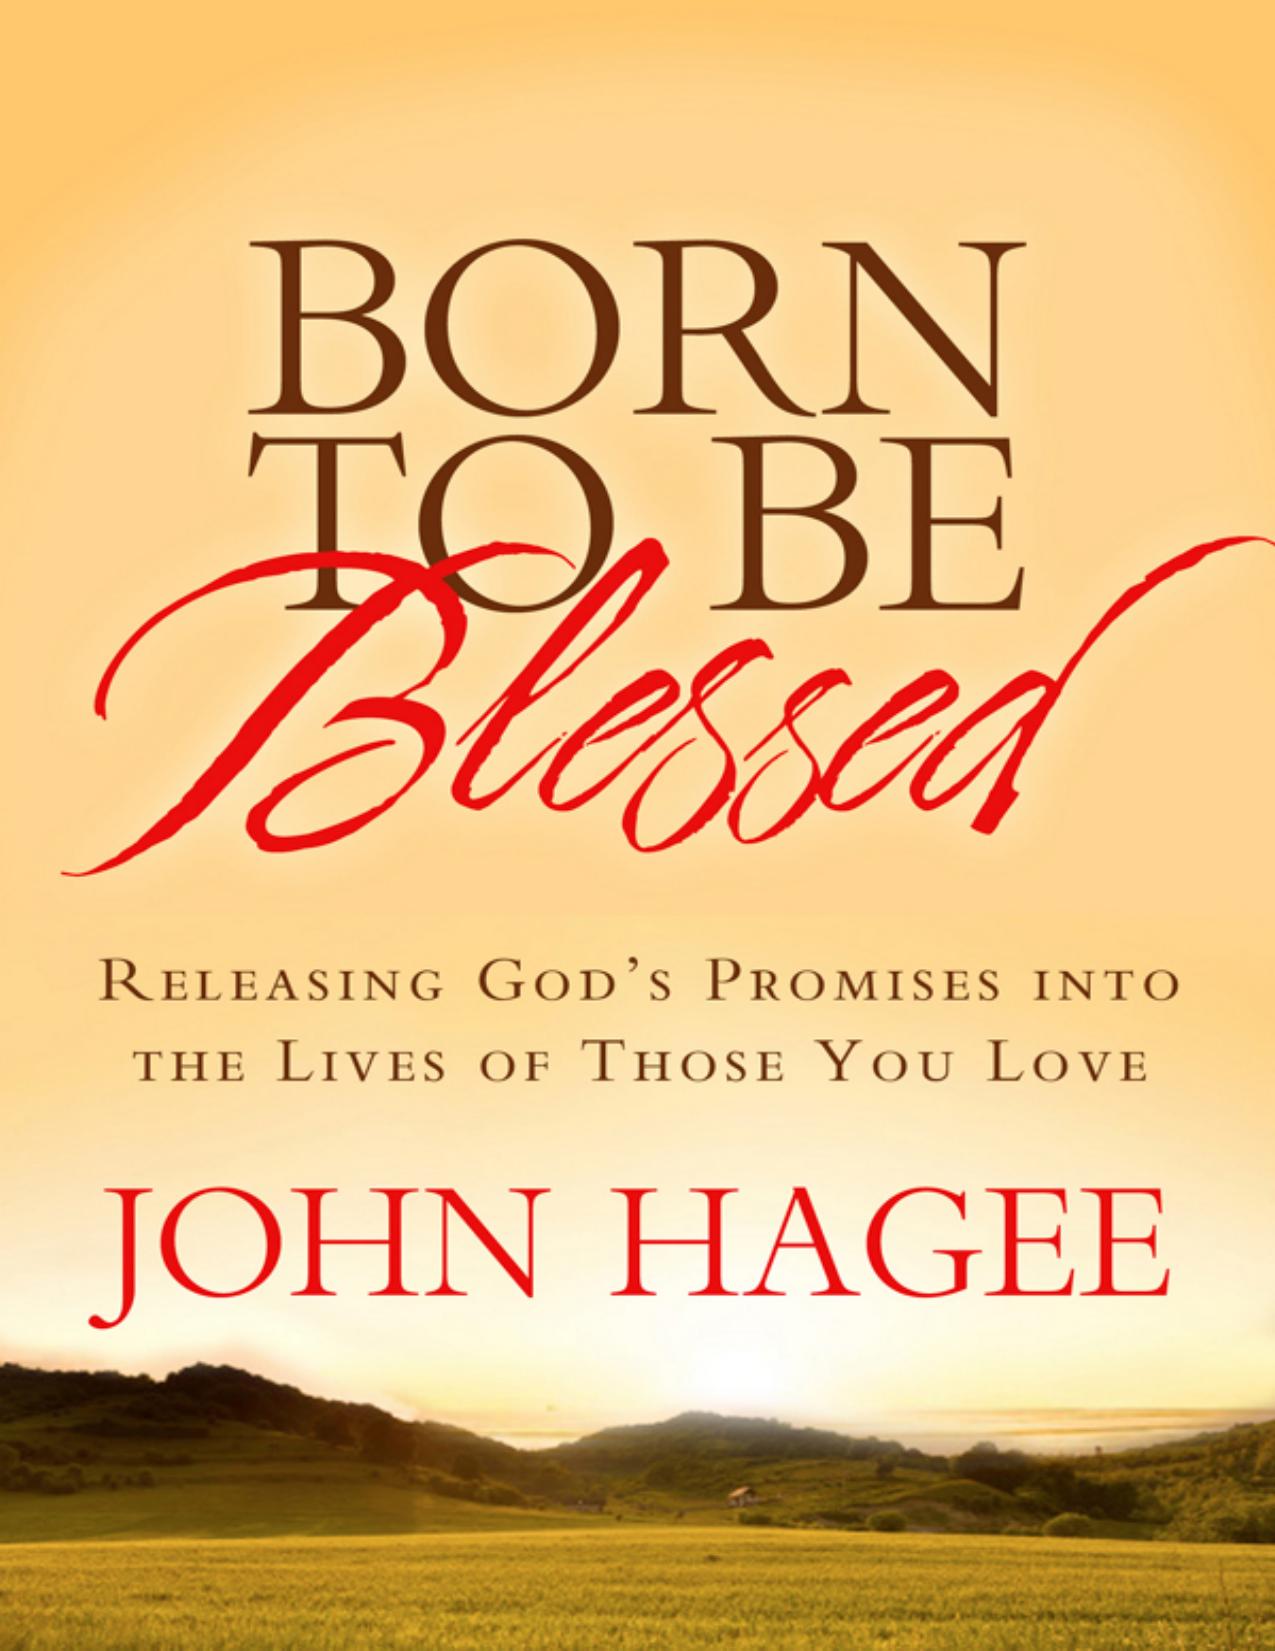 Born to Be Blessed by John Hagee